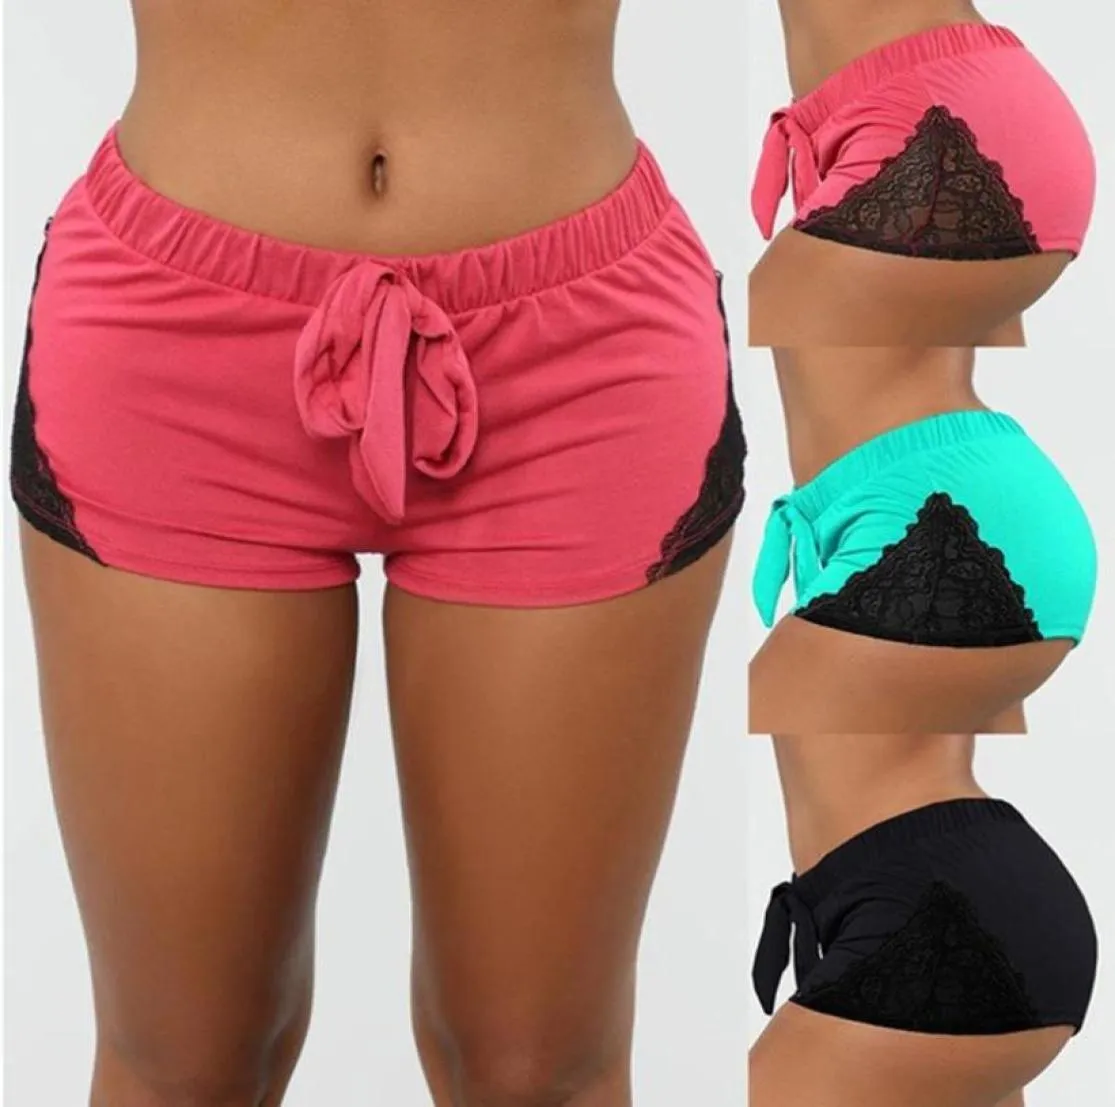 Womens Sexy Fitness Sport Shorts For Gym, Yoga, Running, And Jogging  Athletic Wear Running Shorts With Tights From Debf, $16.6